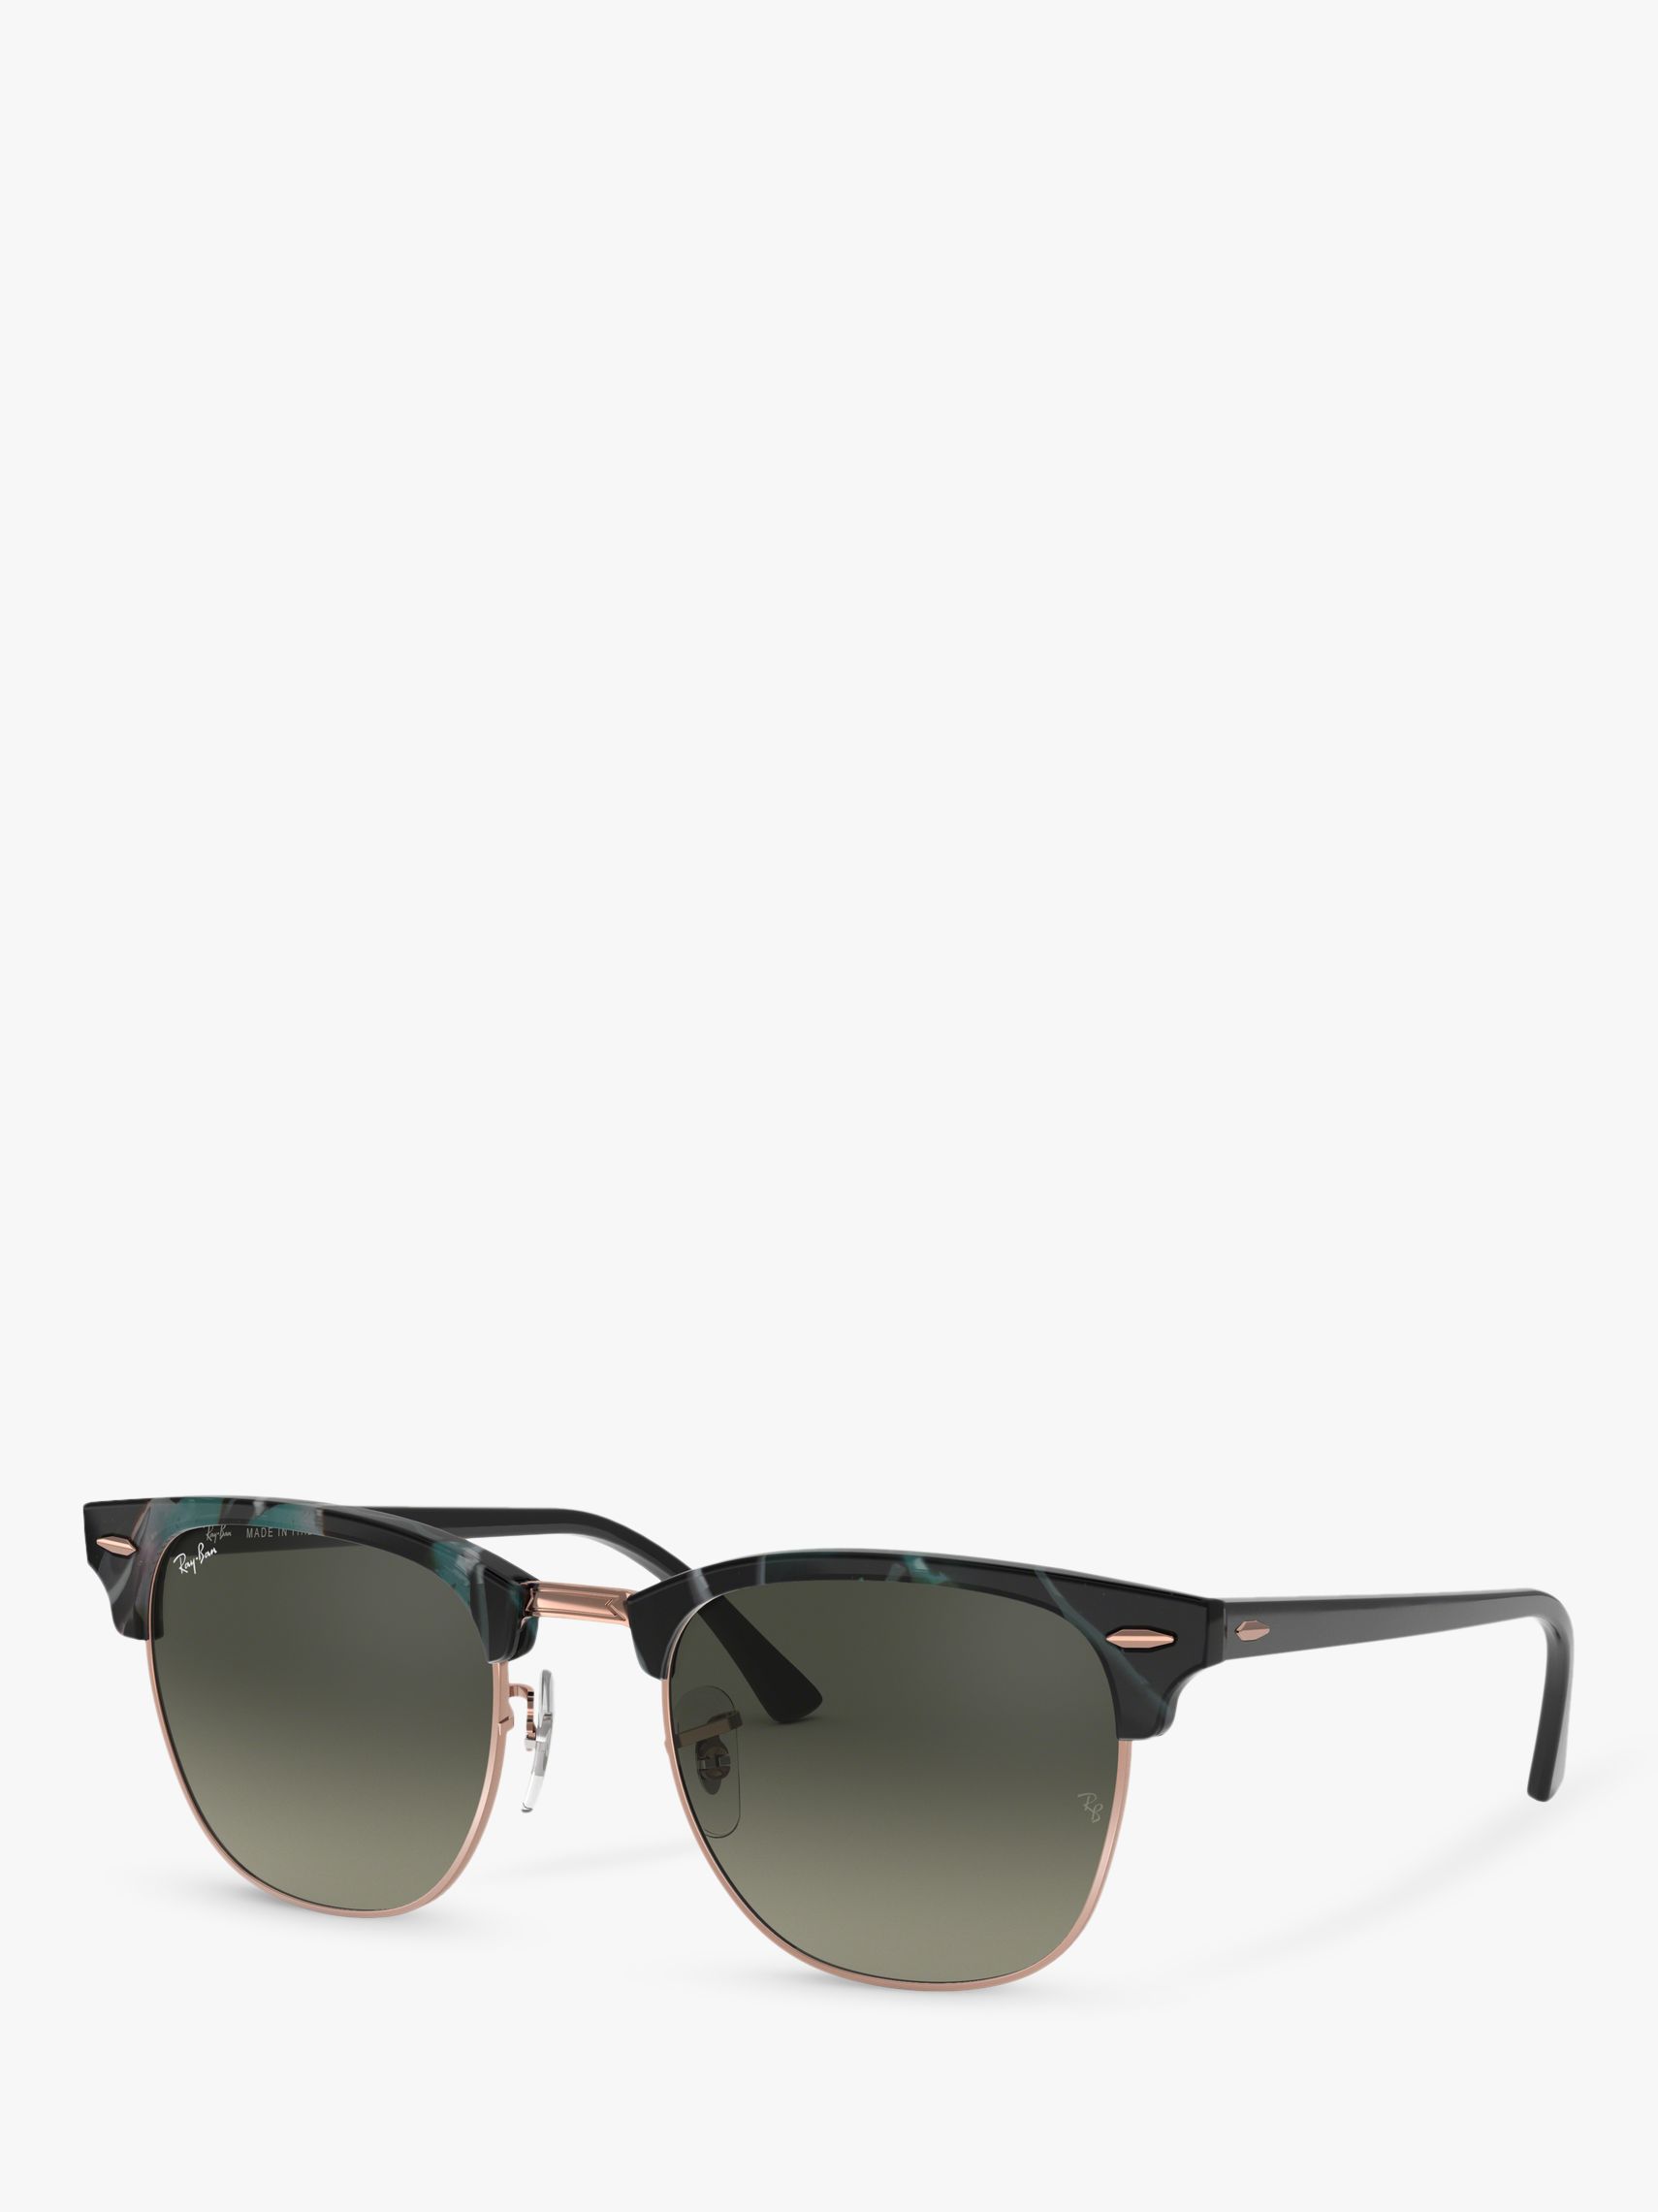 Ray Ban Rb3016 Clubmaster Square Sunglasses Spotted Grey Green At John Lewis Partners